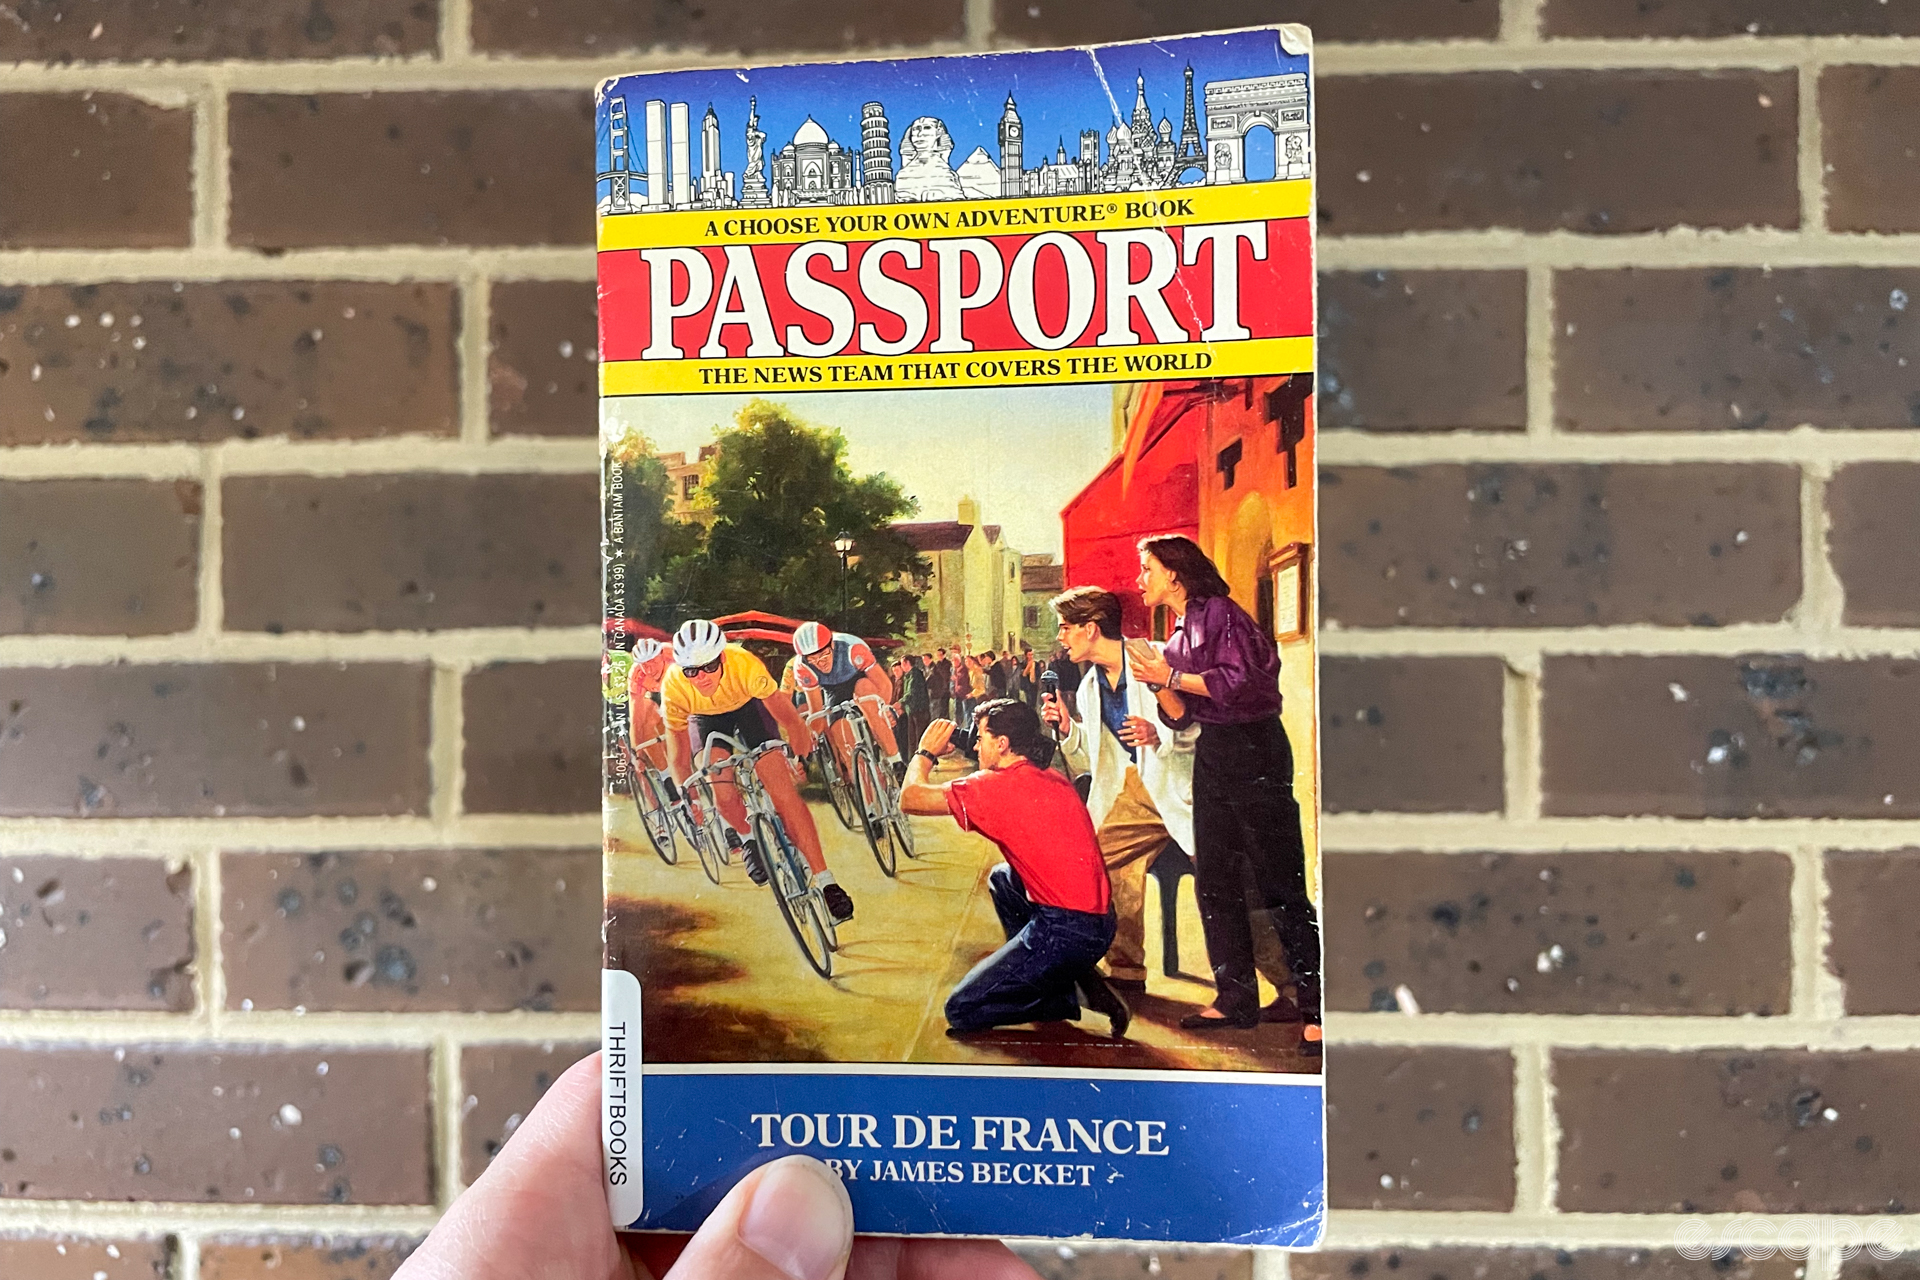 A photo of the cover of a Tour de France-themed Choose Your Own Adventure book in the 'Passport' series, written by James Becket. The book is being held by someone's left hand, with several fingers visible, and with a brick wall in the background.